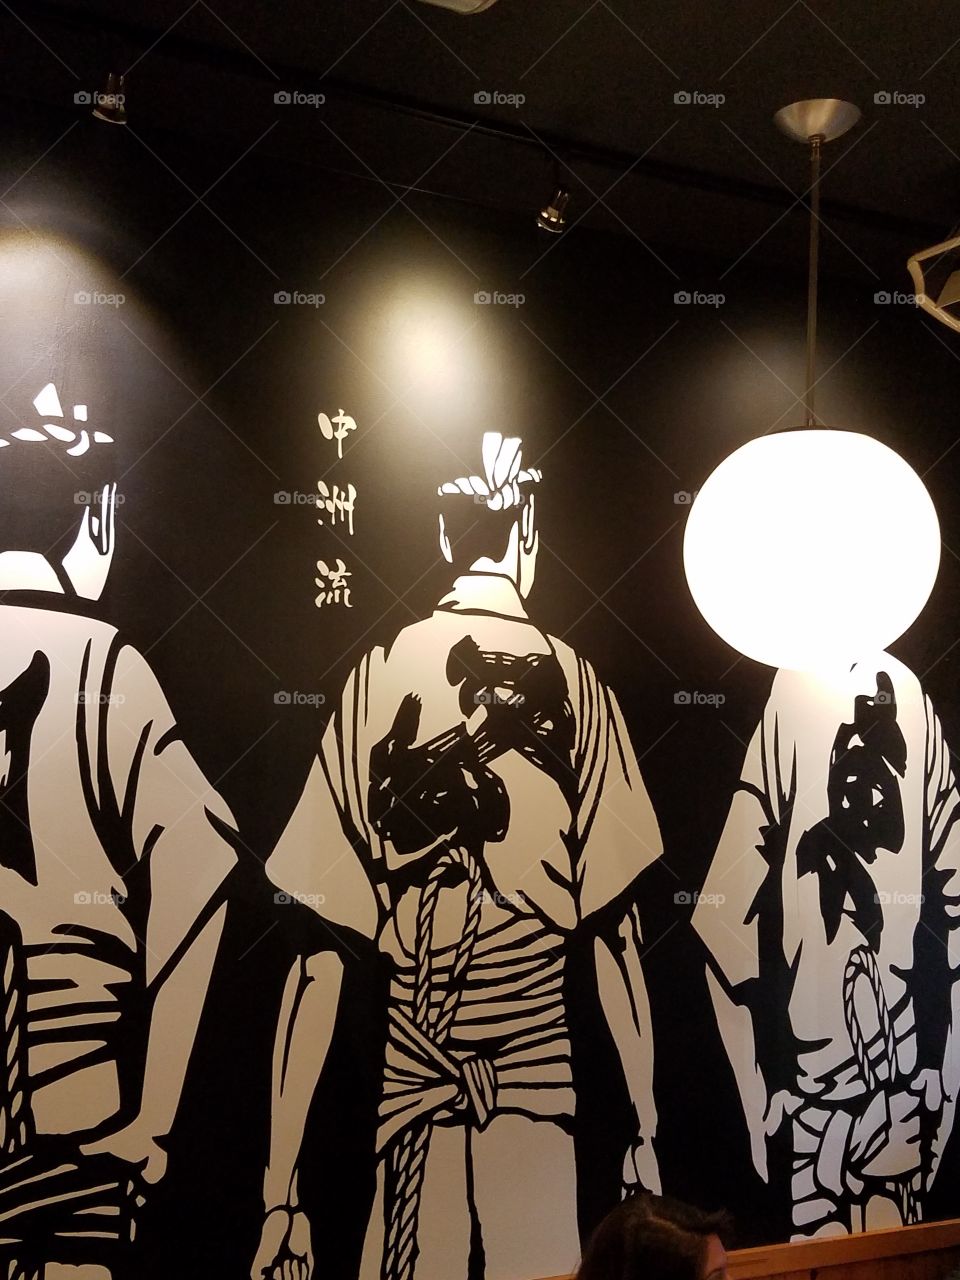 mural of sushi chefs